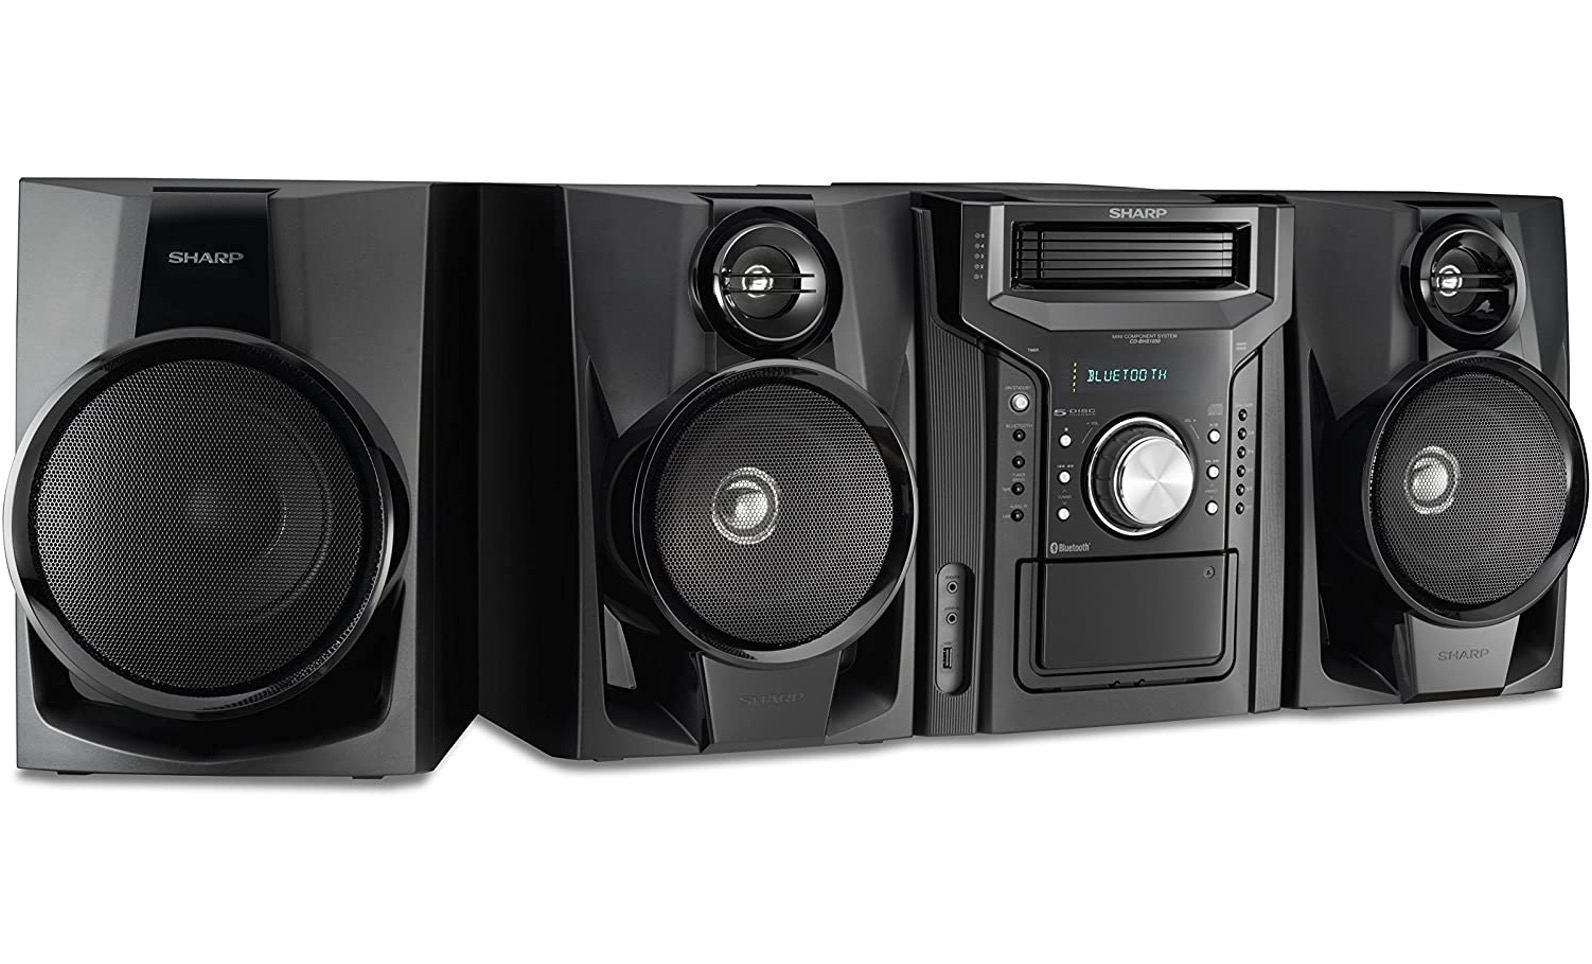 Sharp CD-BHS1050 Home Stereo System